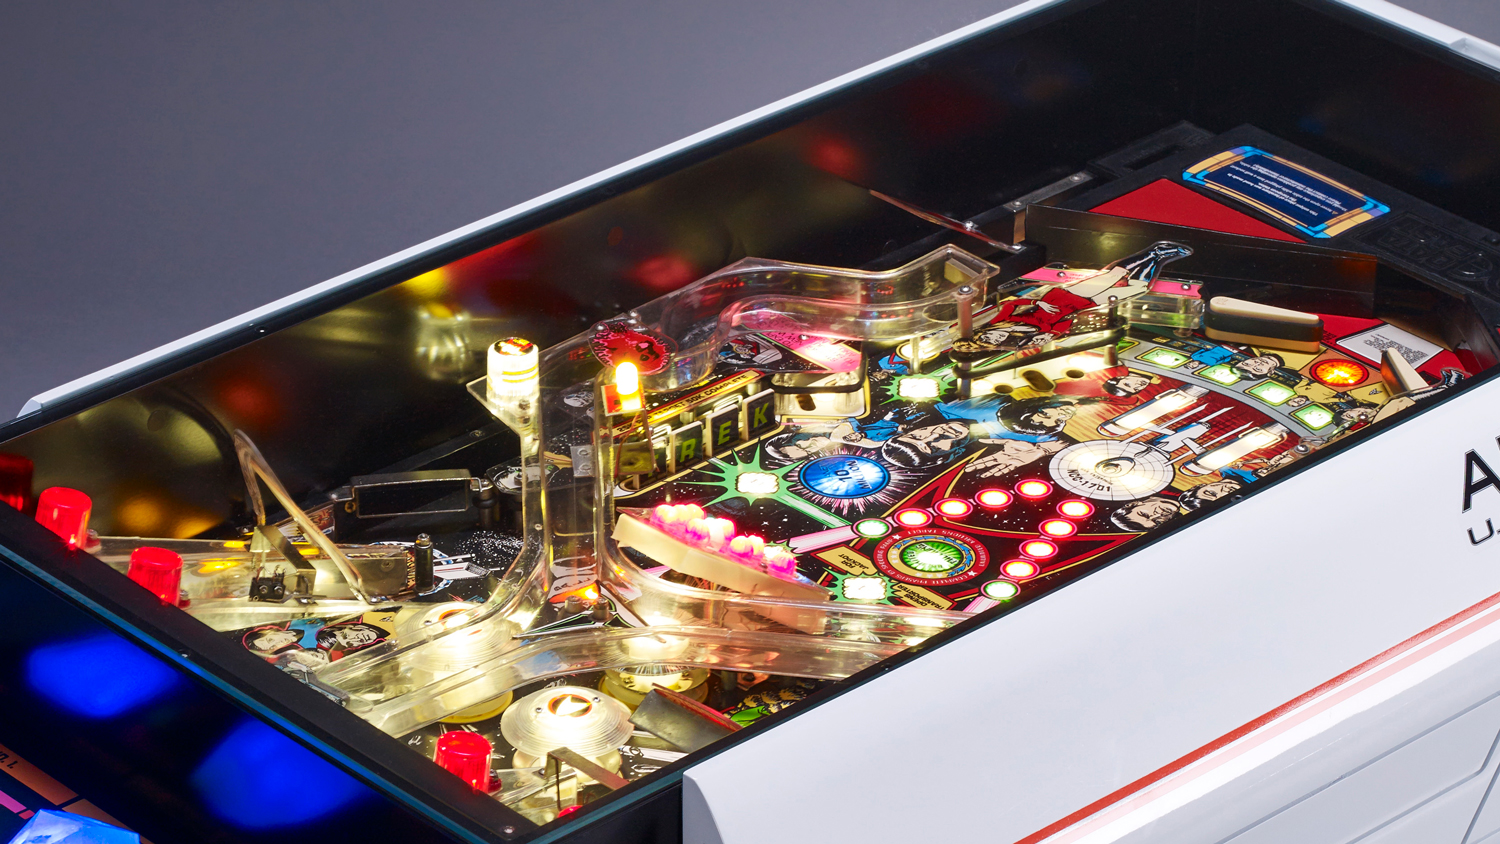 No Living Room Is Complete Without A Star Trek Pinball Machine Coffee Table